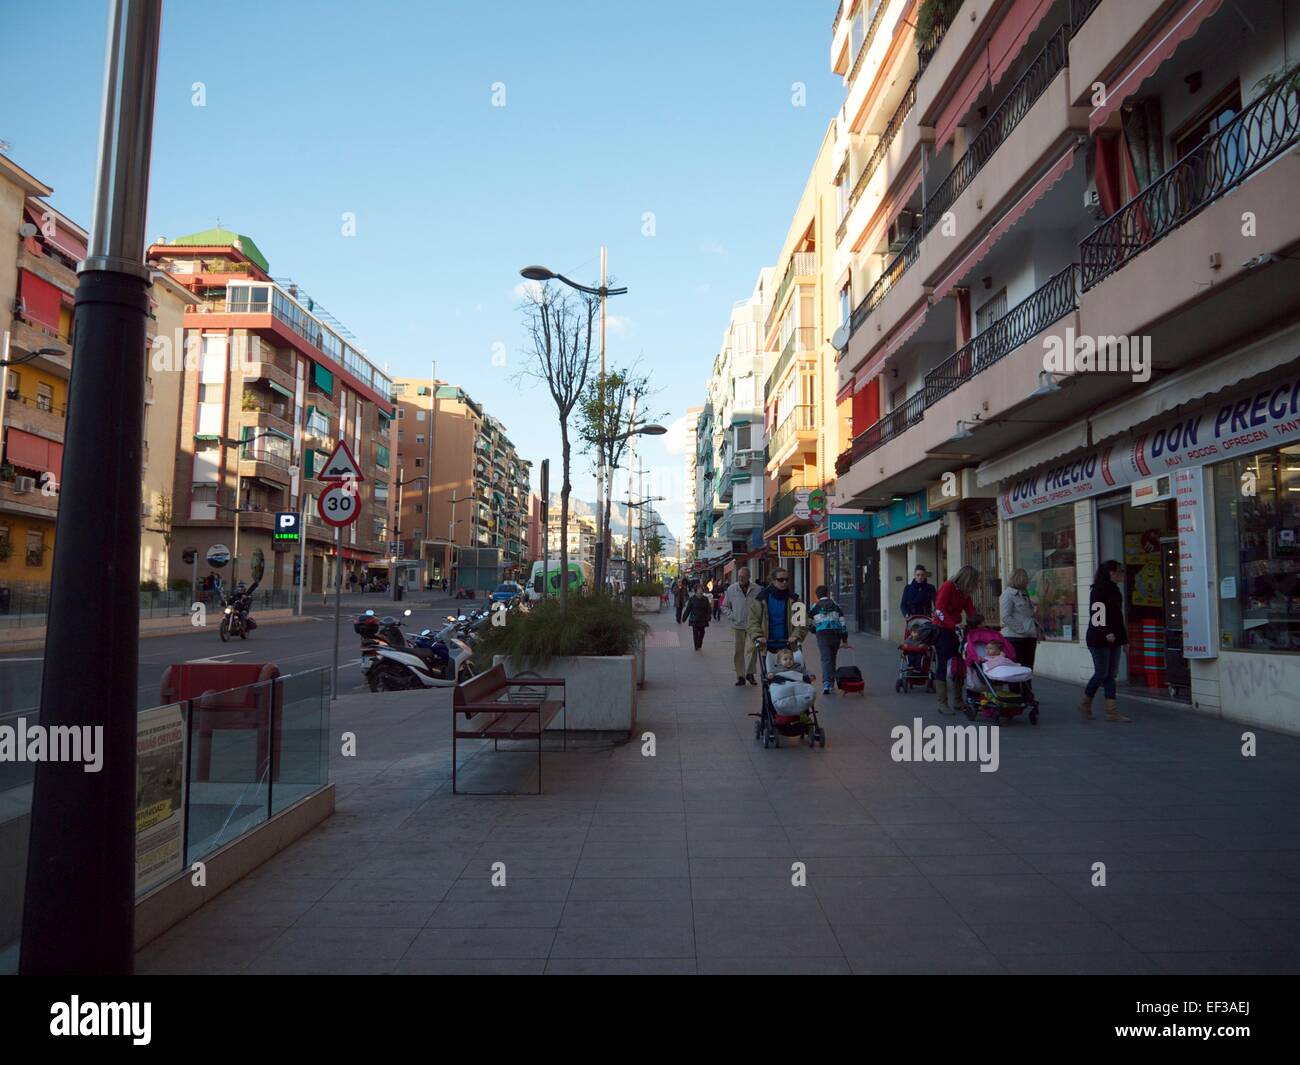 Typical shopping street in Benidorm, Spain Stock Photo